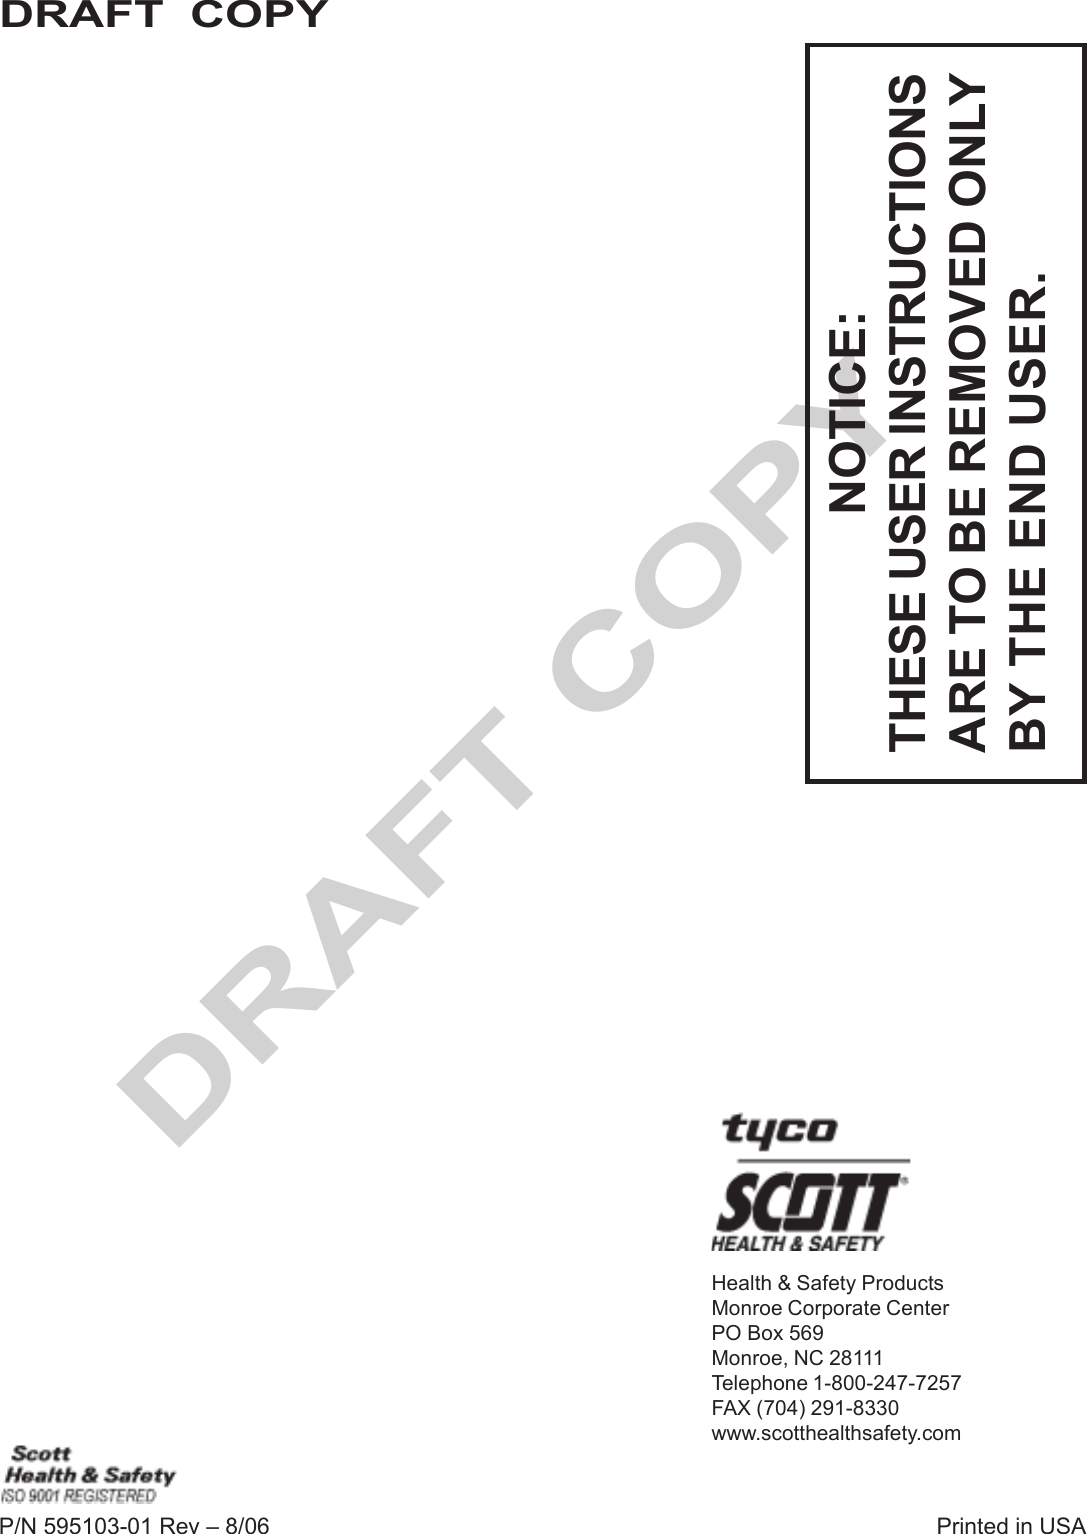 20DRAFT COPYDRAFT  COPYHealth &amp; Safety ProductsMonroe Corporate CenterPO Box 569Monroe, NC 28111Telephone 1-800-247-7257FAX (704) 291-8330www.scotthealthsafety.comPrinted in USAP/N 595103-01 Rev – 8/06NOTICE:THESE USER INSTRUCTIONSARE TO BE REMOVED ONLYBY THE END USER.